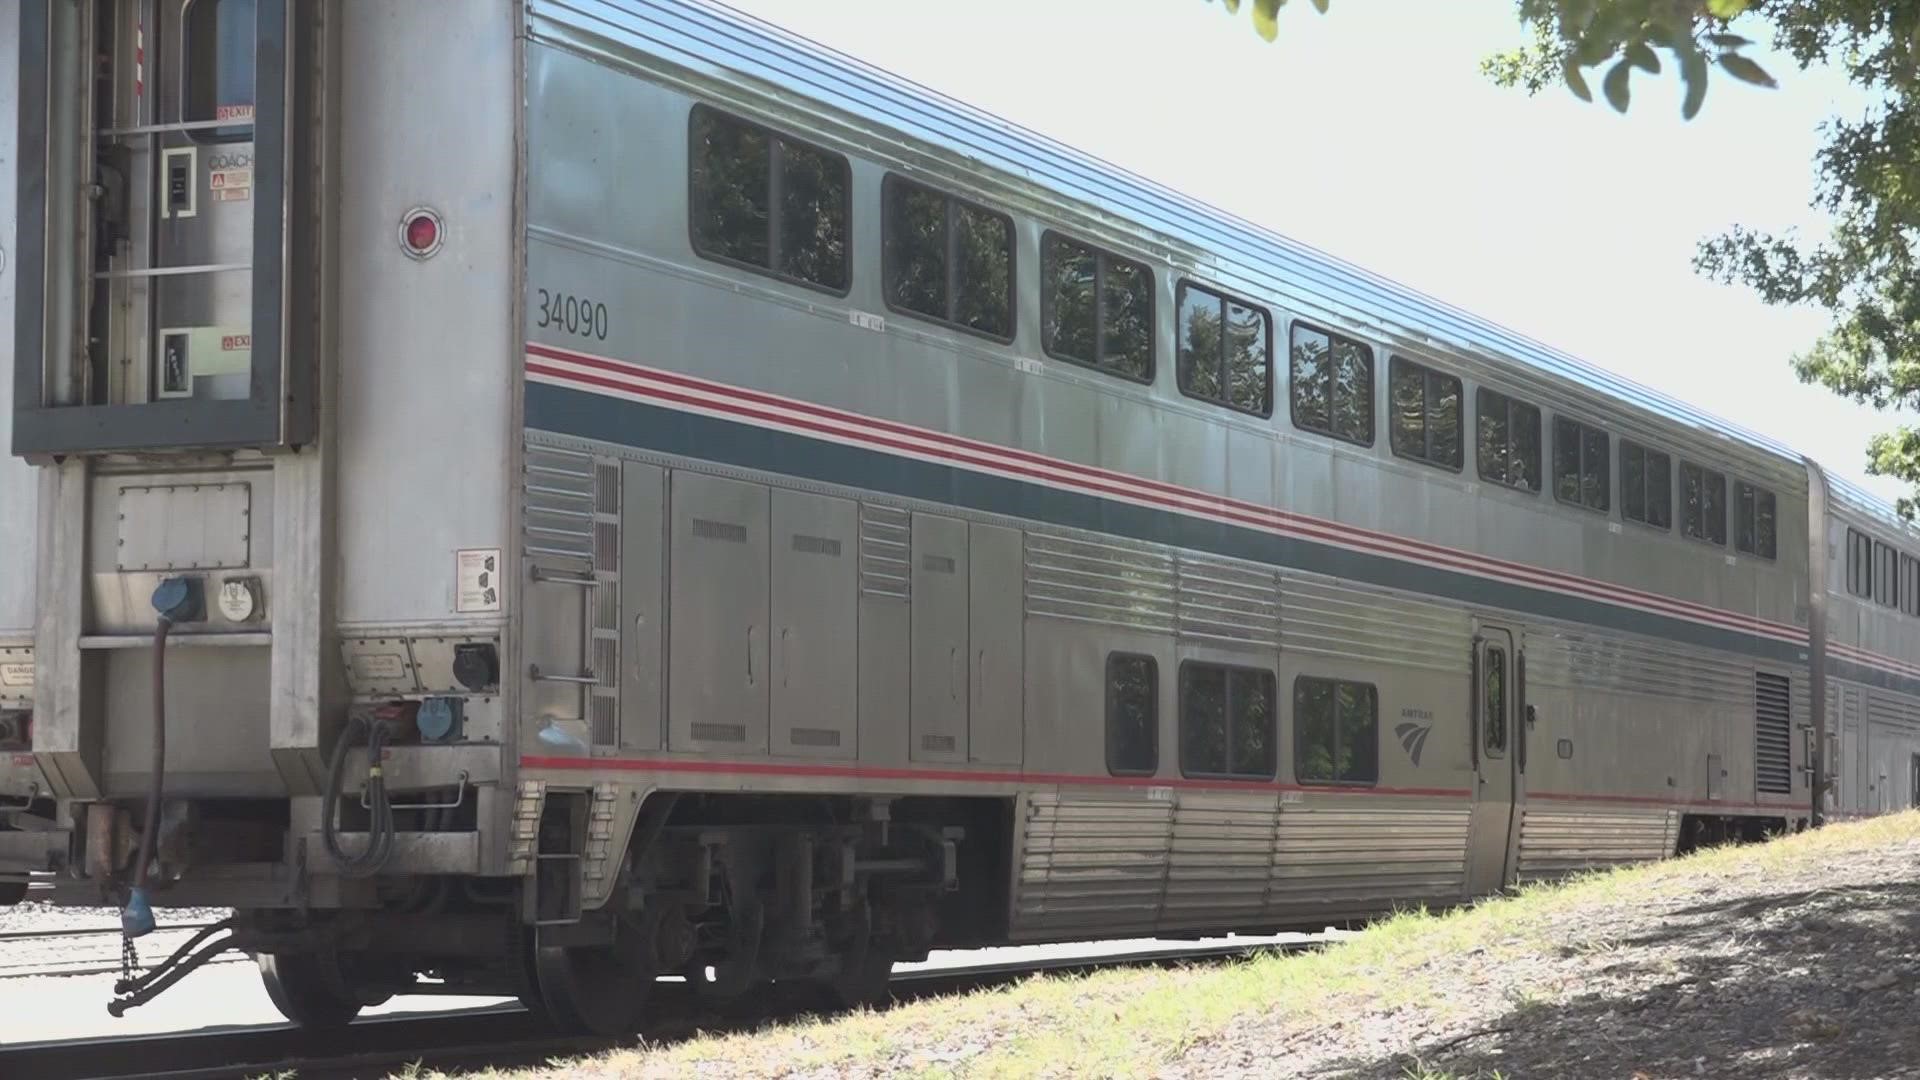 Train travel from San Antonio to Houston? It's in the works. | kens5.com